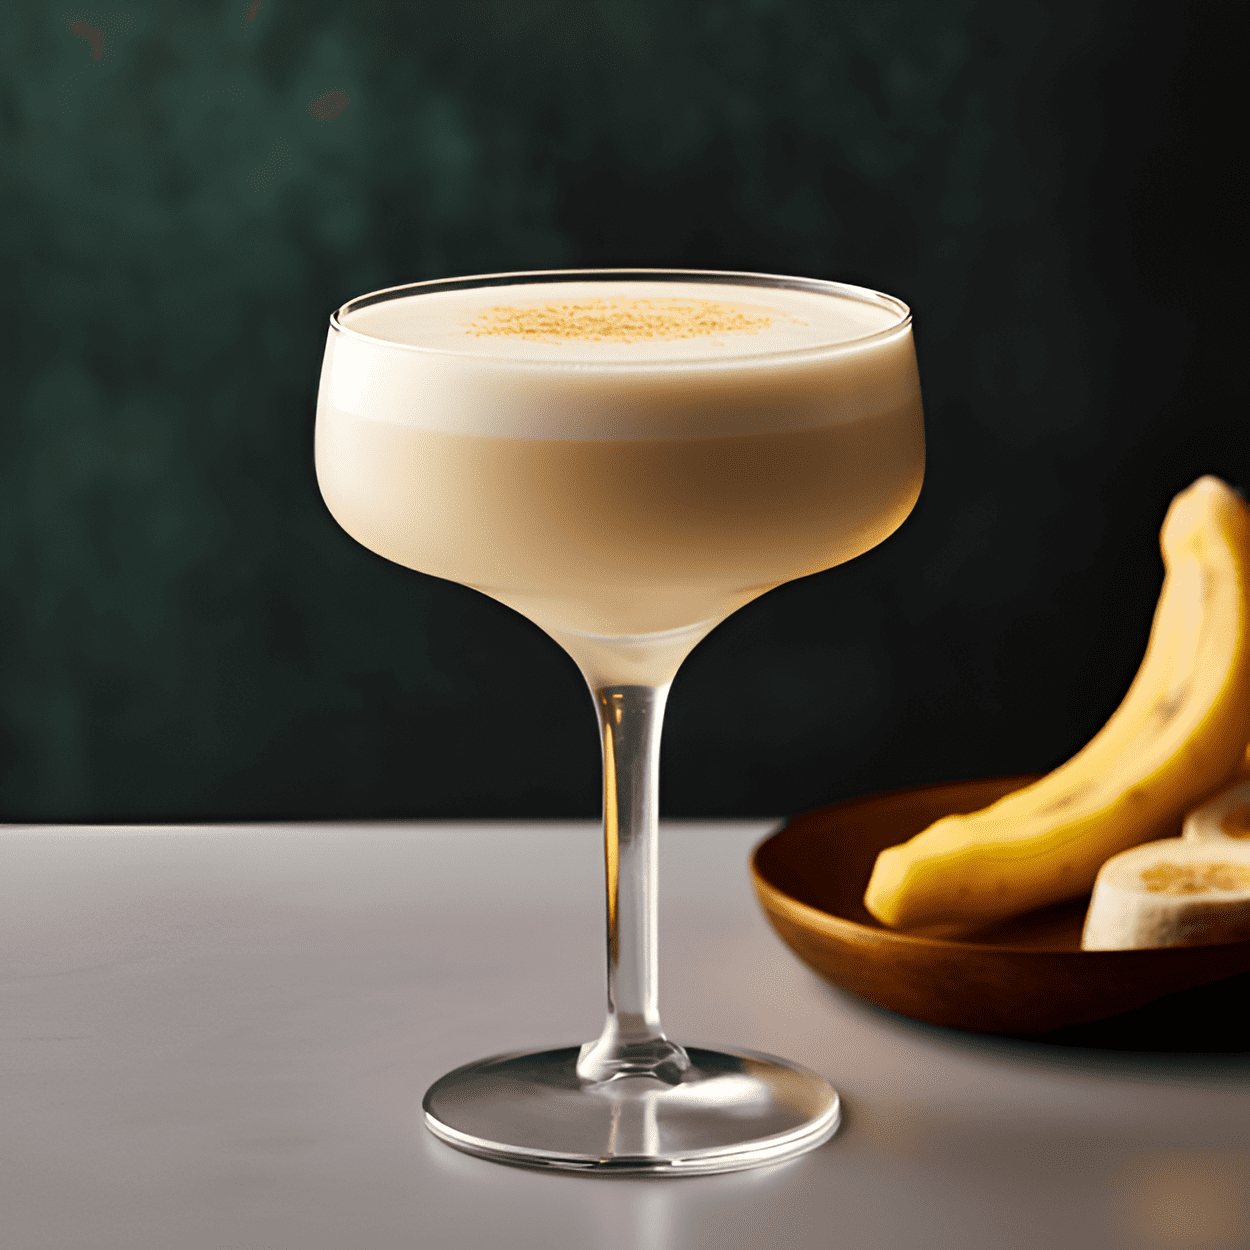 Elvis Presley Cocktail Recipe - The Elvis Presley cocktail is sweet, creamy, and rich. The peanut butter and banana flavors meld together perfectly, creating a smooth, dessert-like taste. The rum adds a hint of warmth and complexity.